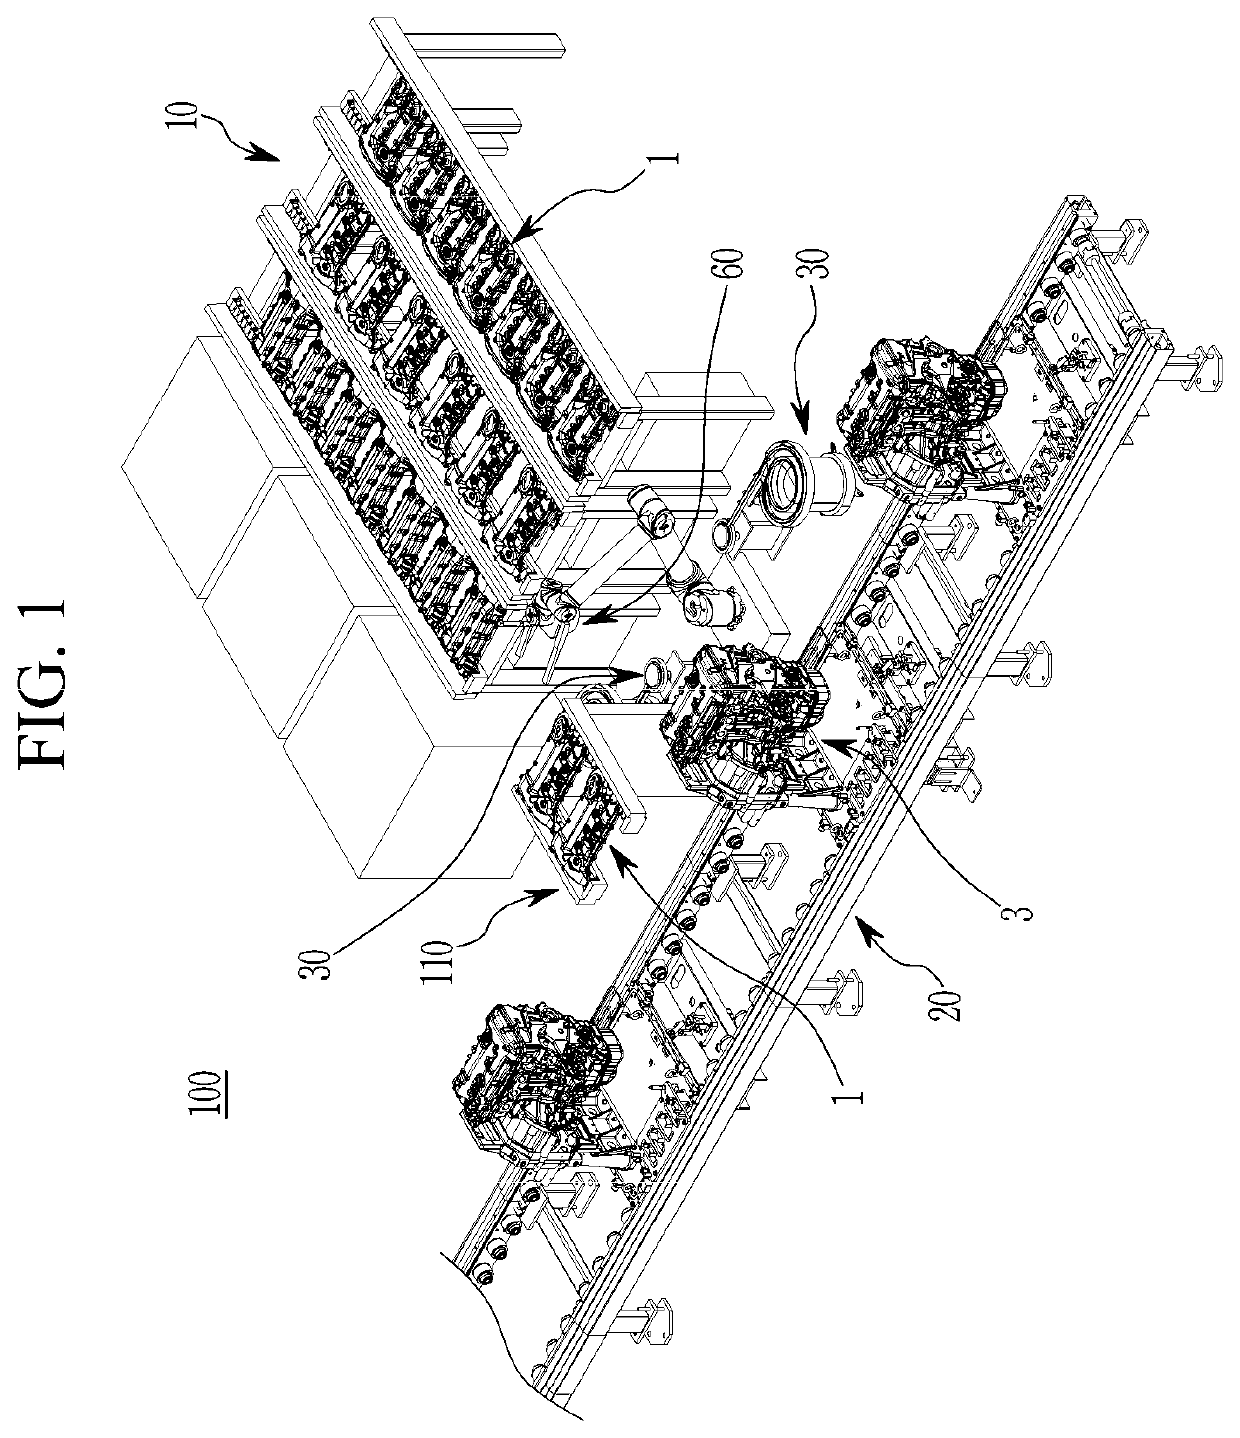 Parts assembling system and method